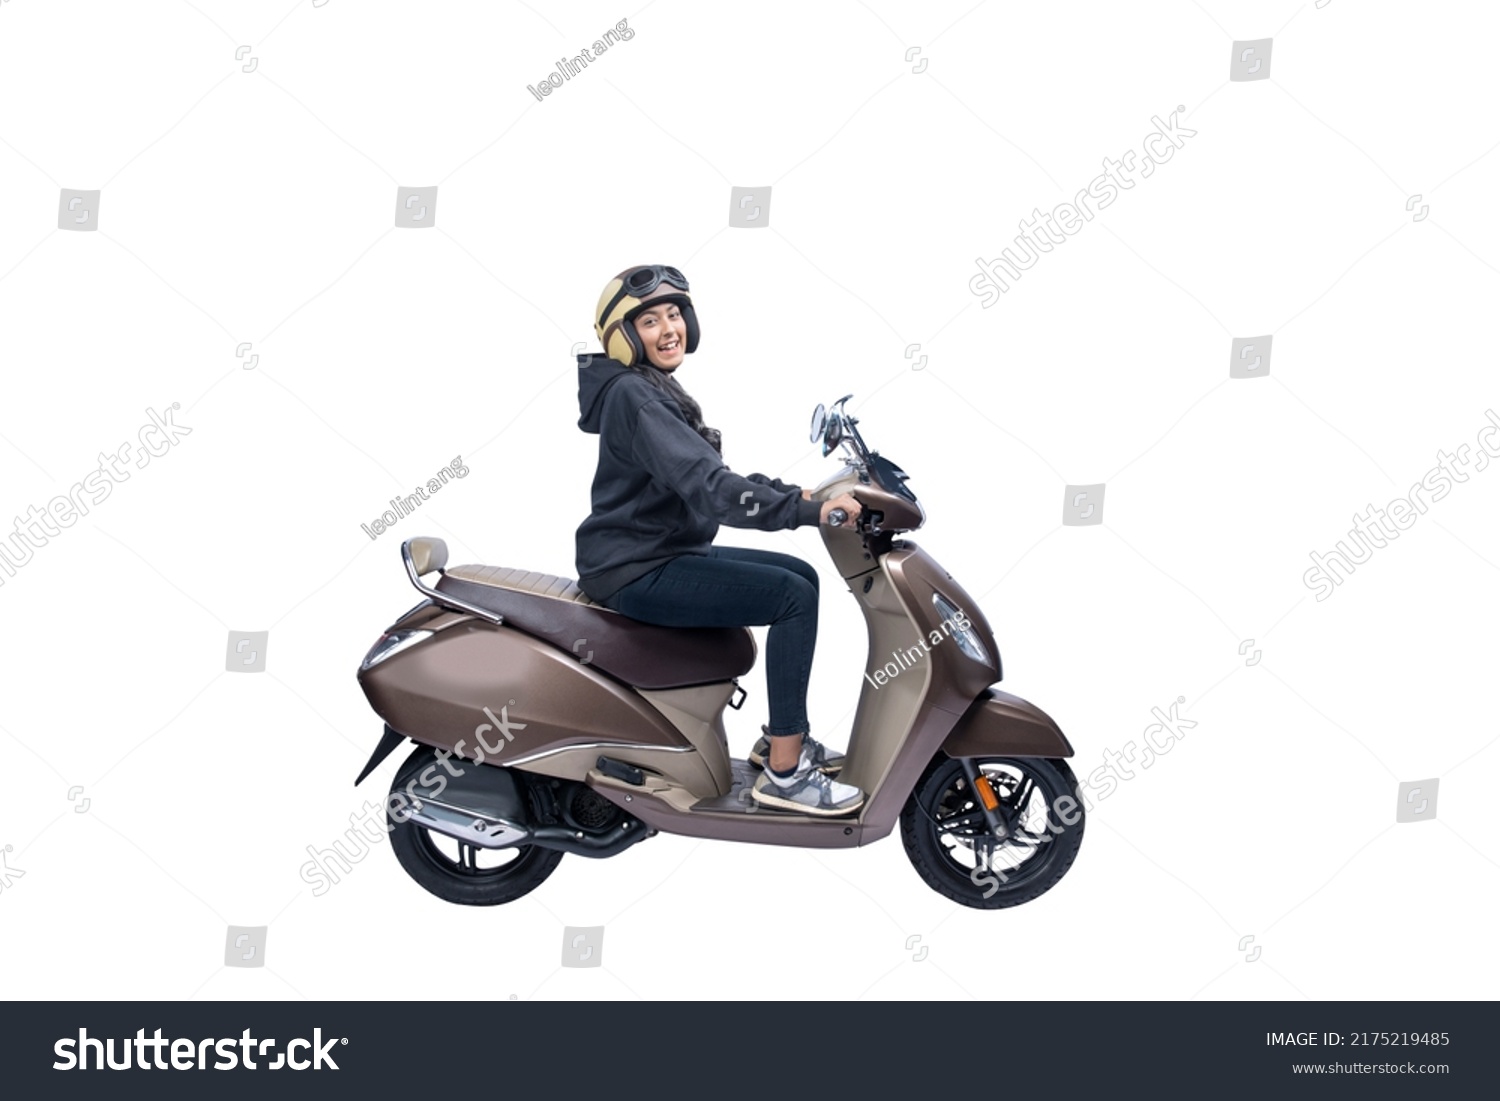 Asian woman with a helmet and jacket sitting on a scooter isolated over white background #2175219485